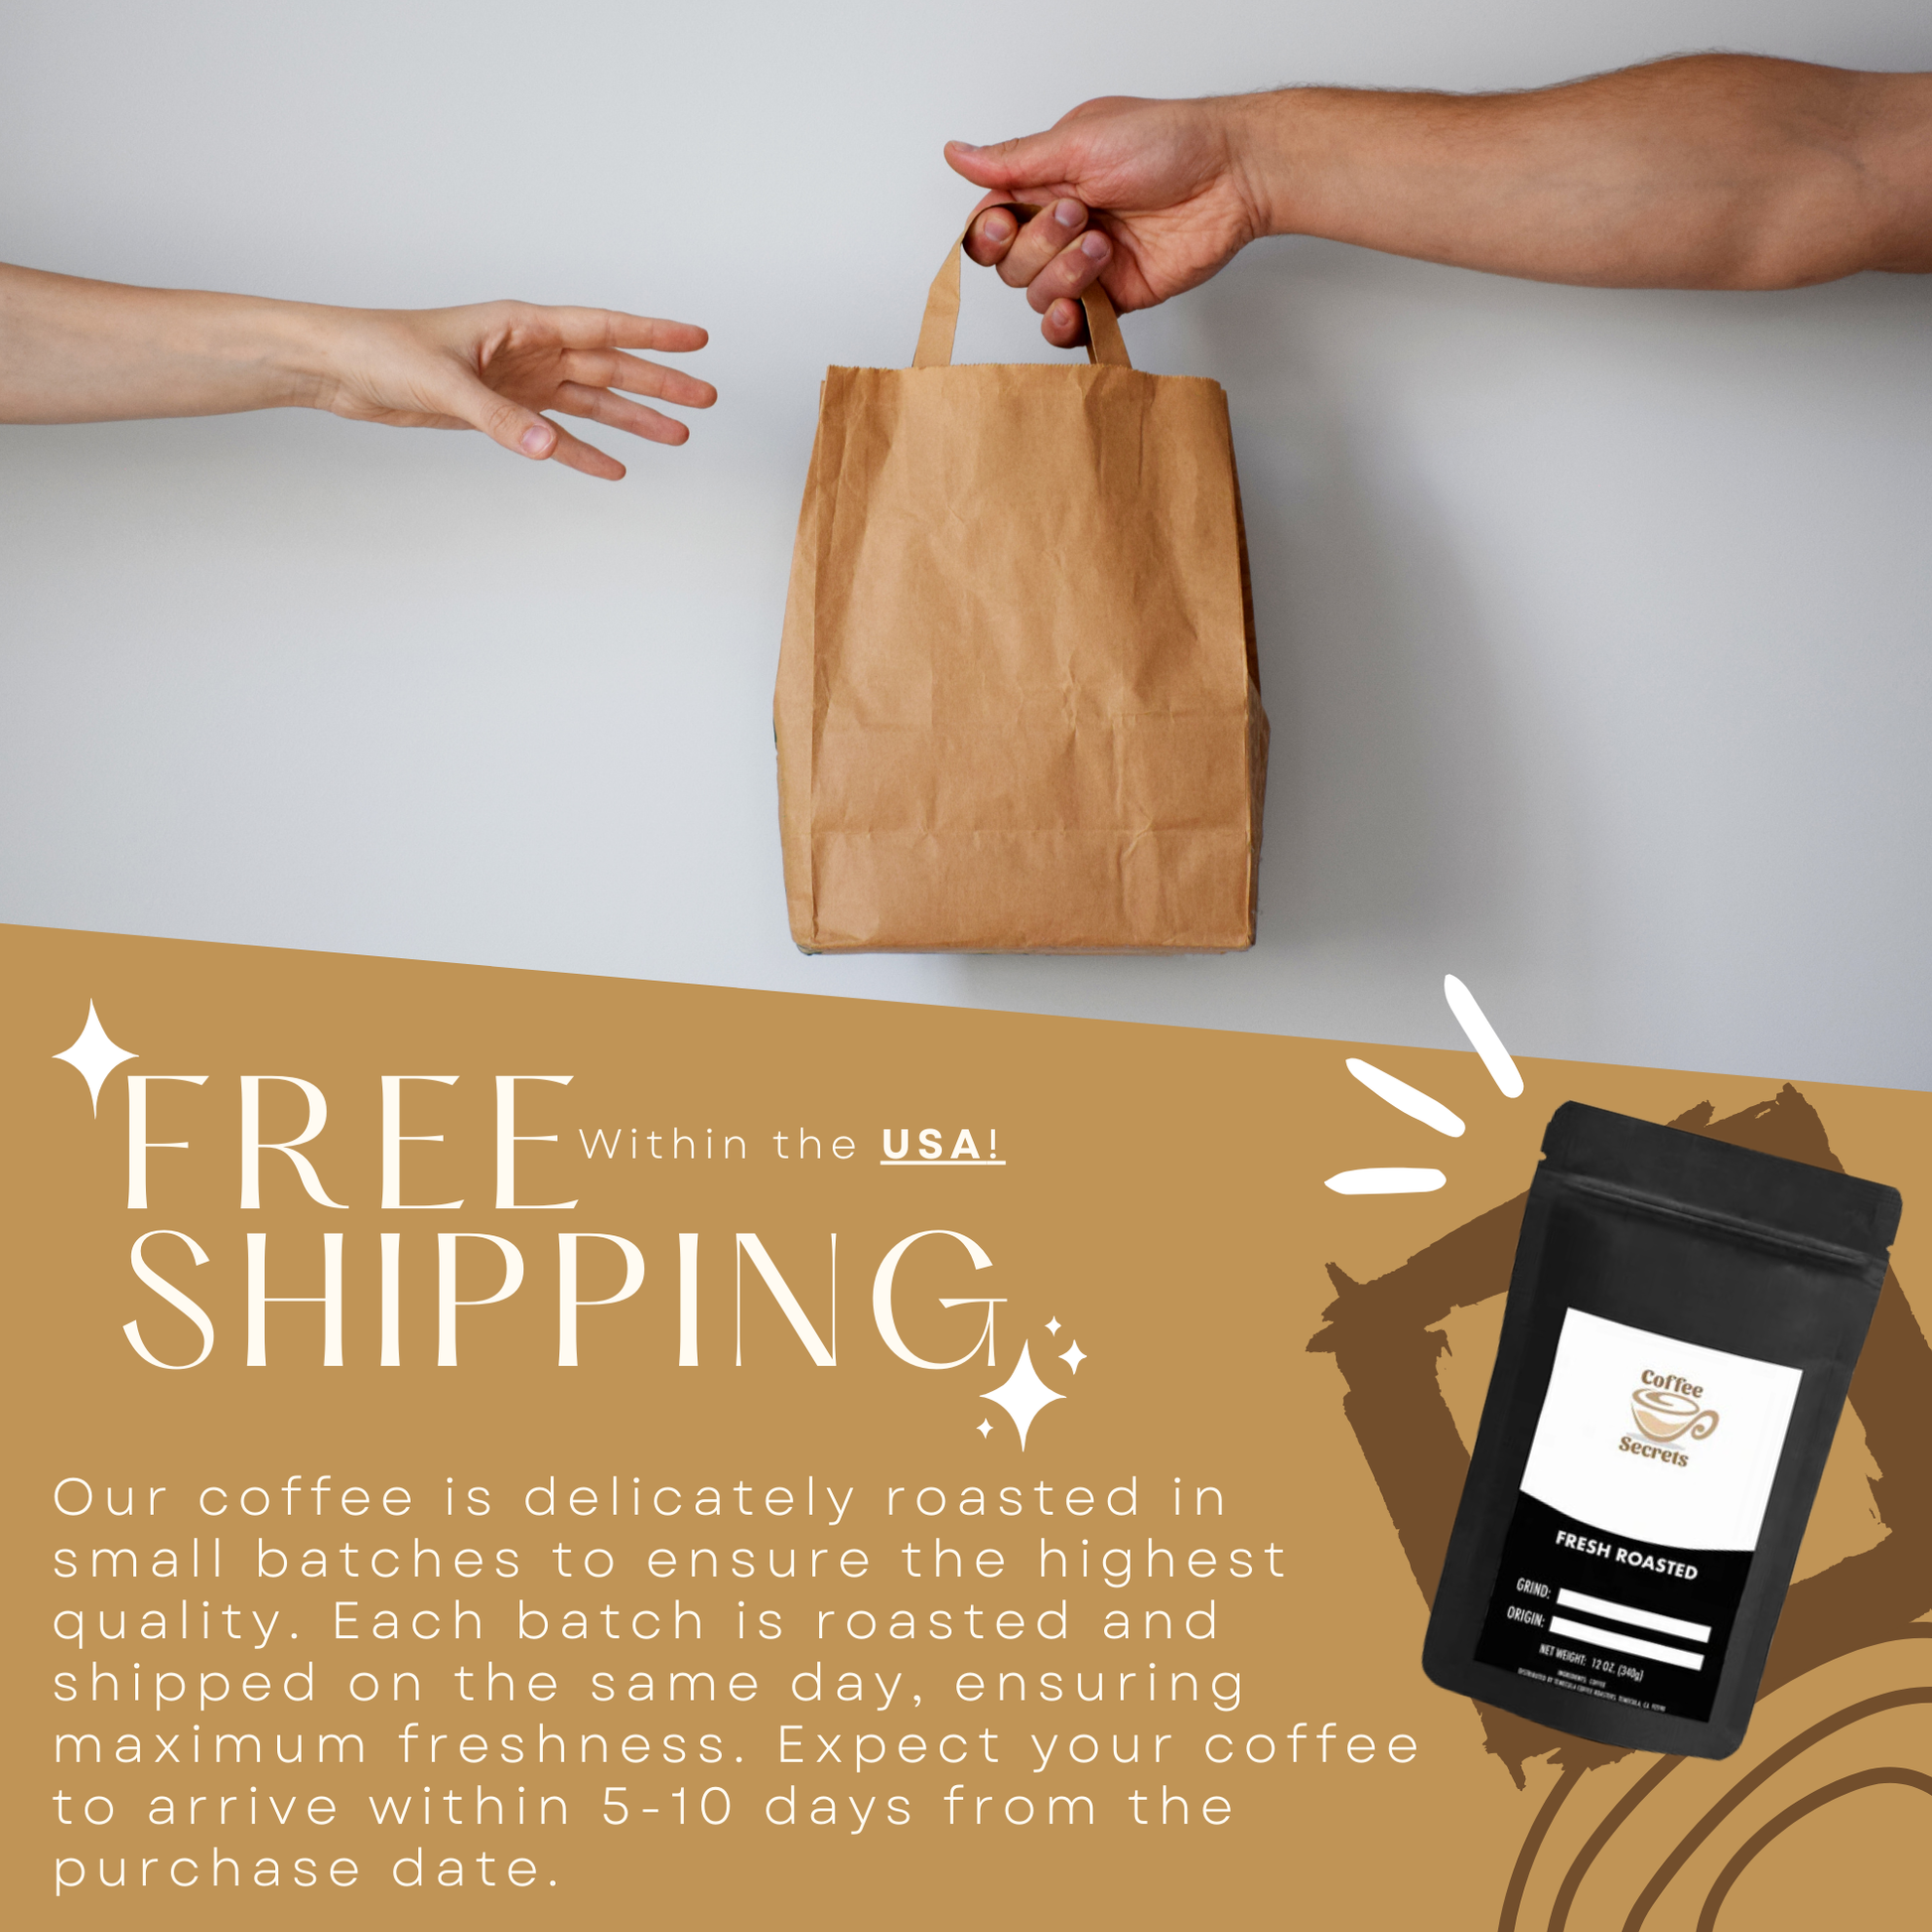 Hands exchanging a paper bag with text overlay reading: 'FREE SHIPPING Within the USA! Our coffee is delicately roasted in small batches to ensure the highest quality. Each batch is roasted and shipped on the same day, ensuring maximum freshness. Expect your coffee to arrive within 5-10 days from the purchase date.' Includes Coffee Secrets branded coffee bag.